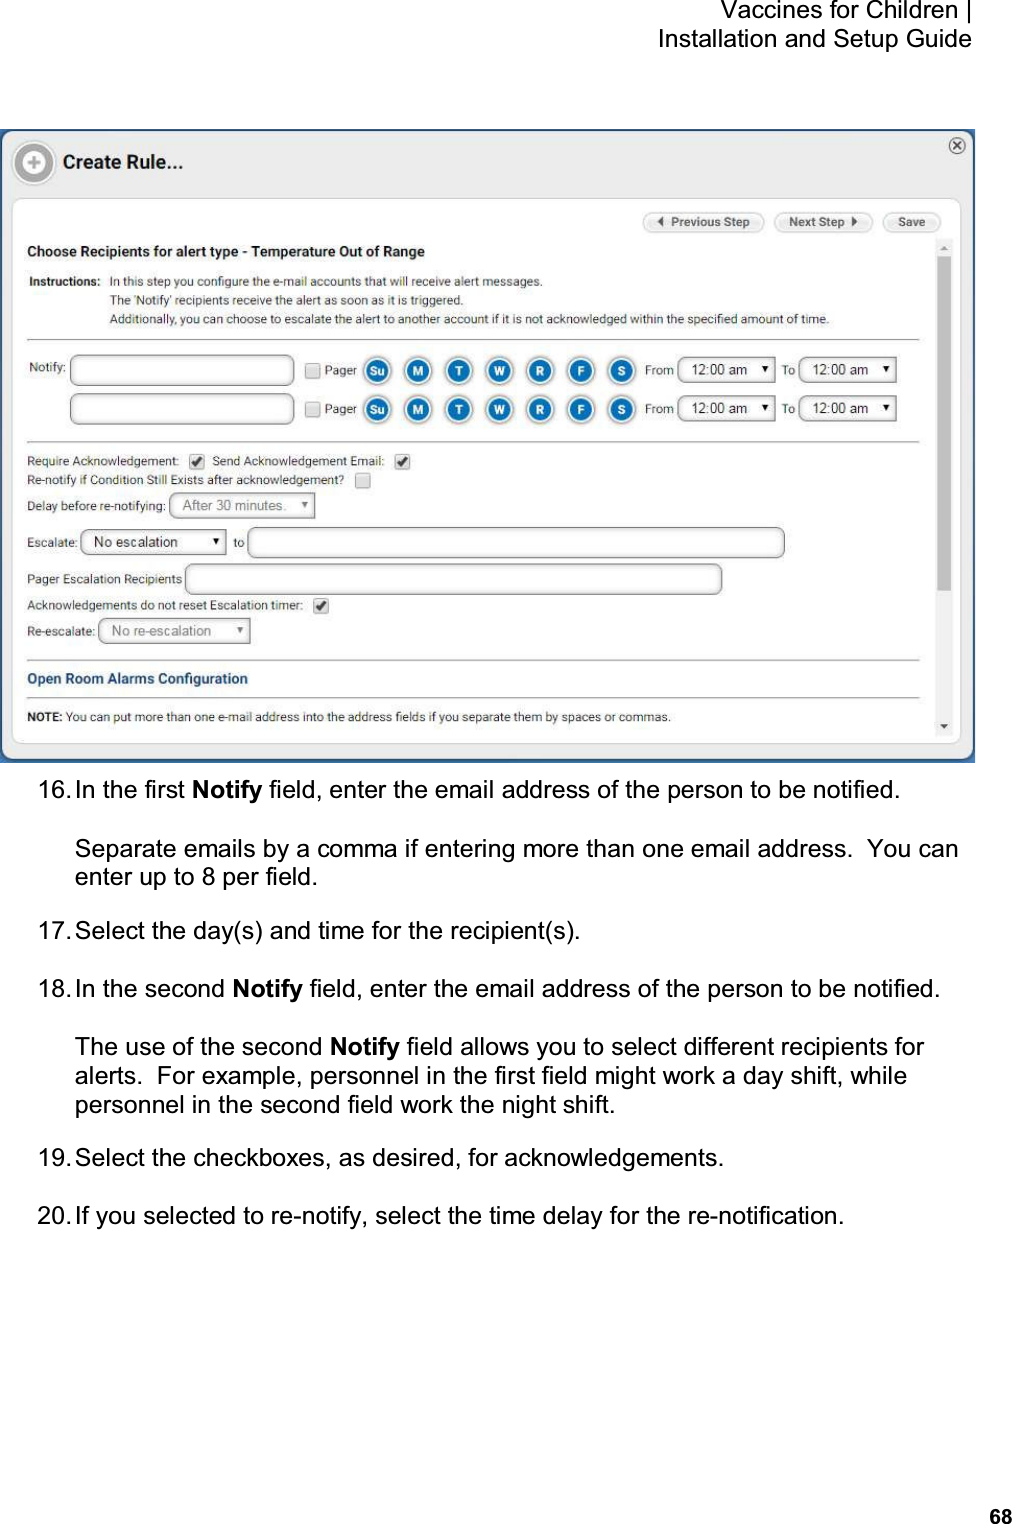           68 Vaccines for Children |  Installation and Setup Guide  16. In the first Notify field, enter the email address of the person to be notified. Separate emails by a comma if entering more than one email address.  You can enter up to 8 per field. 17. Select the day(s) and time for the recipient(s). 18. In the second Notify field, enter the email address of the person to be notified. The use of the second Notify field allows you to select different recipients for alerts.  For example, personnel in the first field might work a day shift, while personnel in the second field work the night shift. 19. Select the checkboxes, as desired, for acknowledgements. 20. If you selected to re-notify, select the time delay for the re-notification. 